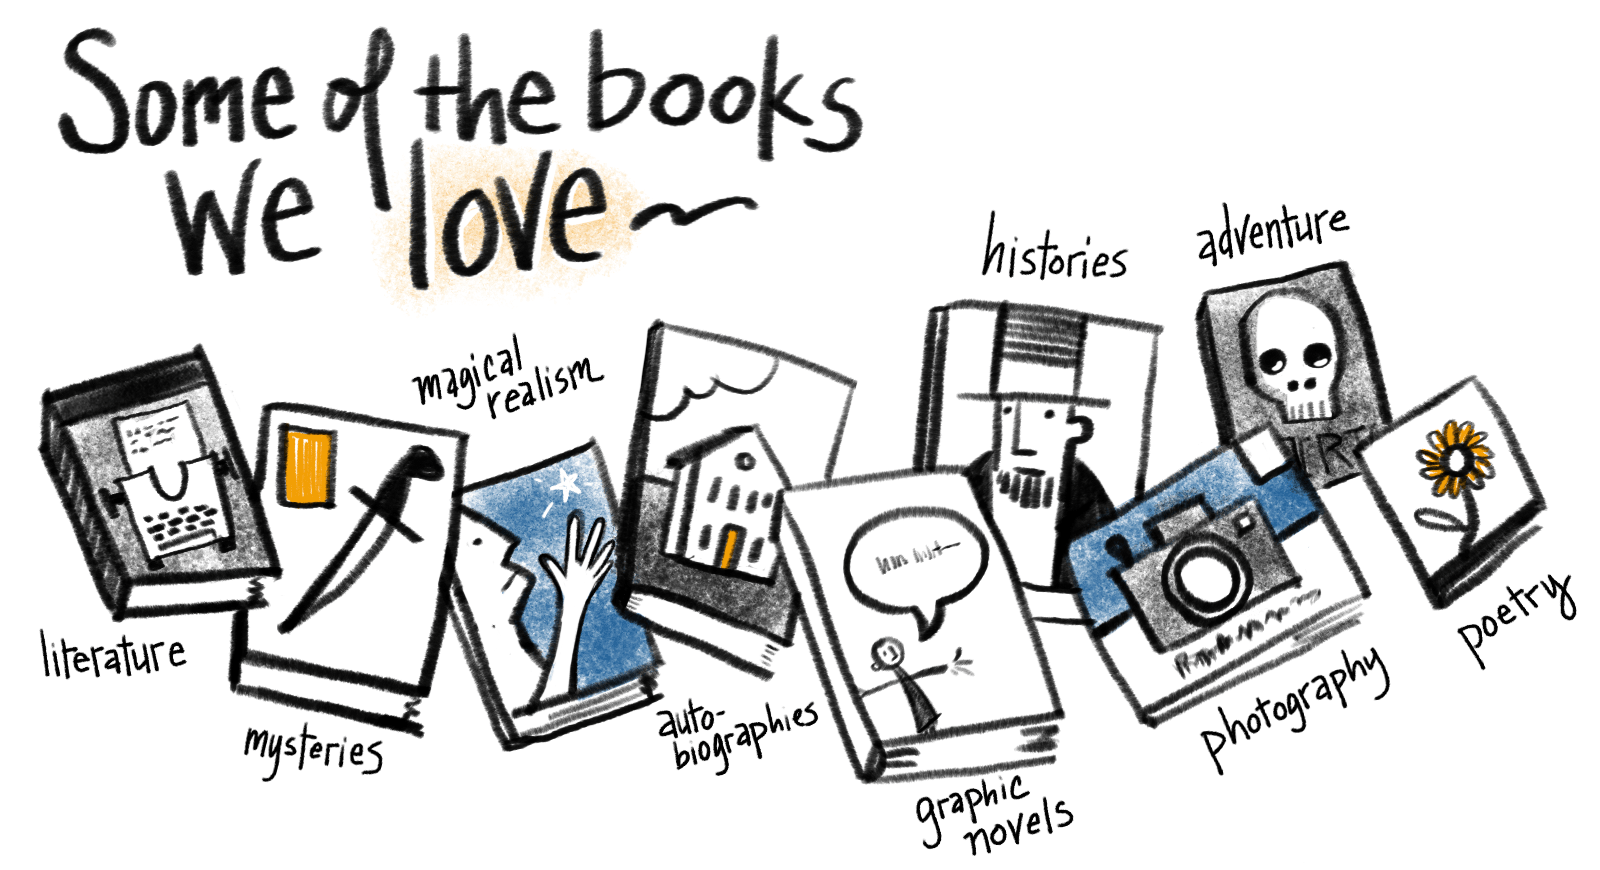 Types of books we like